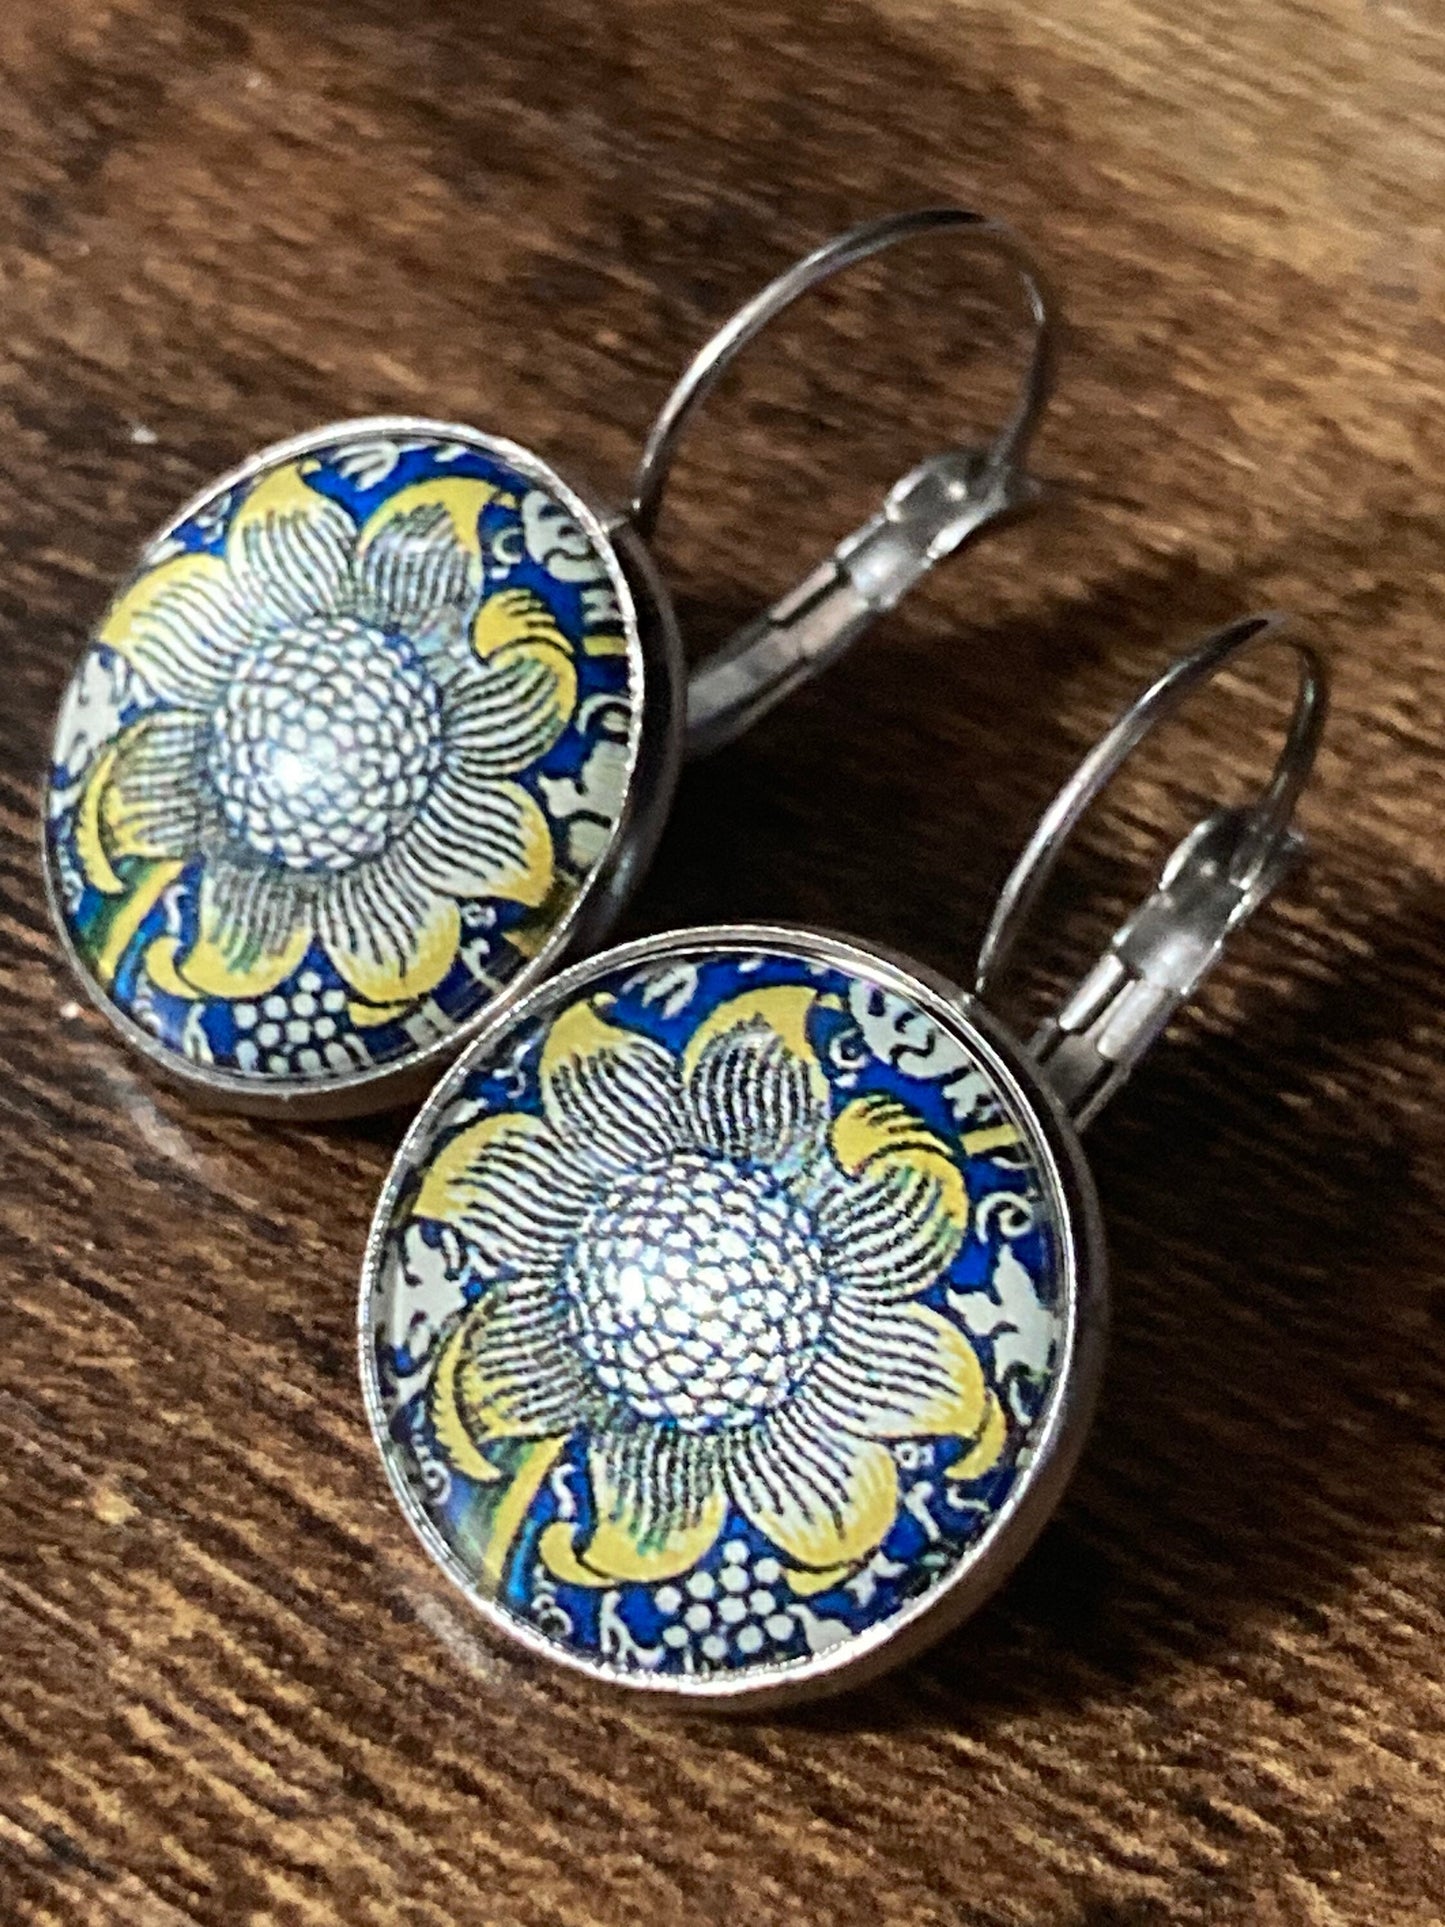 William Morris print earrings round glass cabochon 3cm dangly silver plated